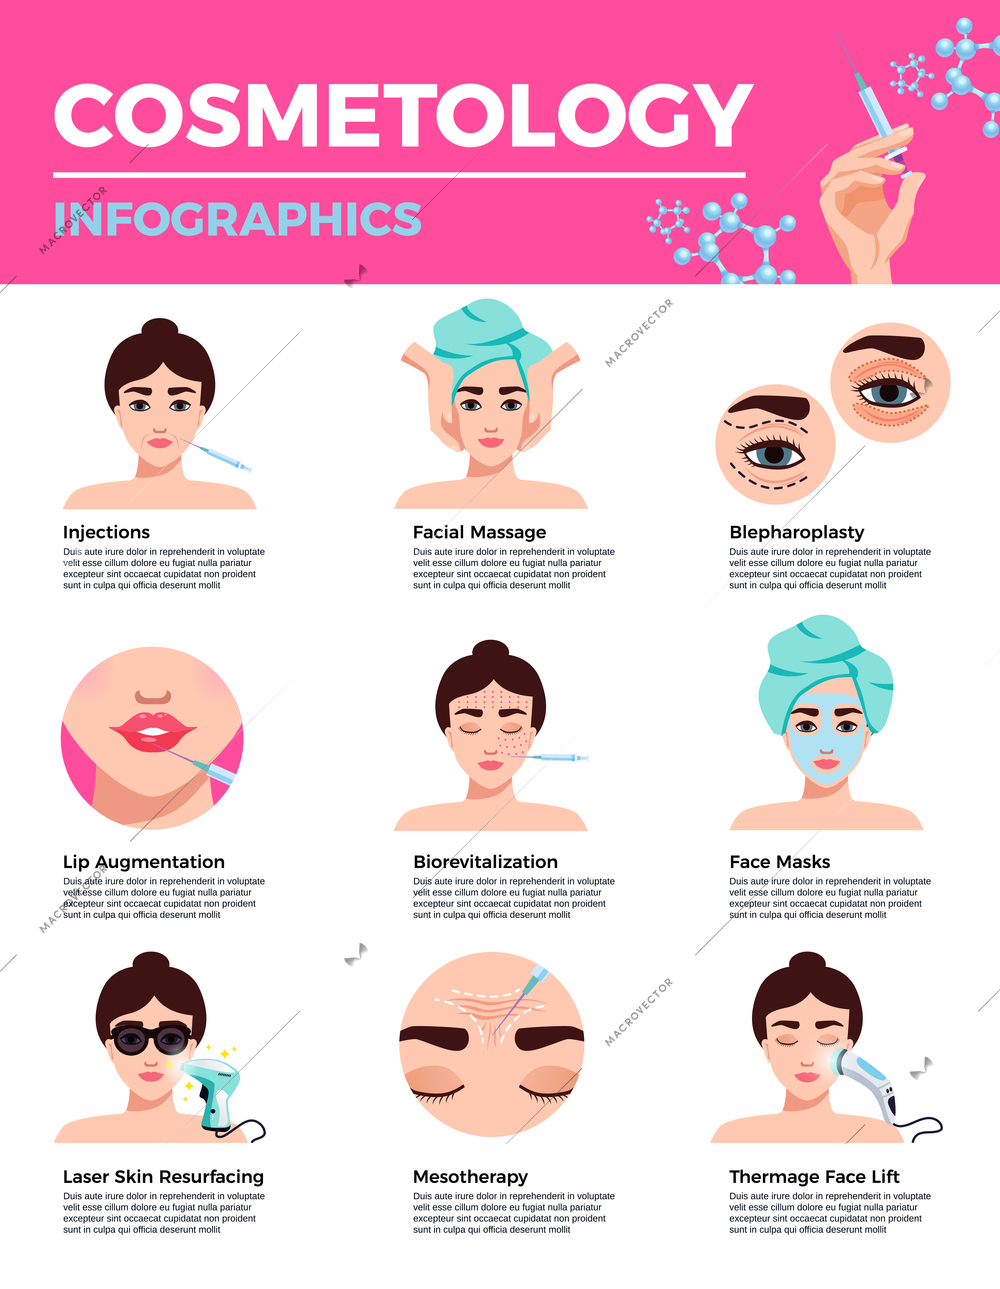 Cosmetology facial rejuvenation beauty industry acupuncture lips fulling treatment descriptive text under flat icons infographic vector illustration